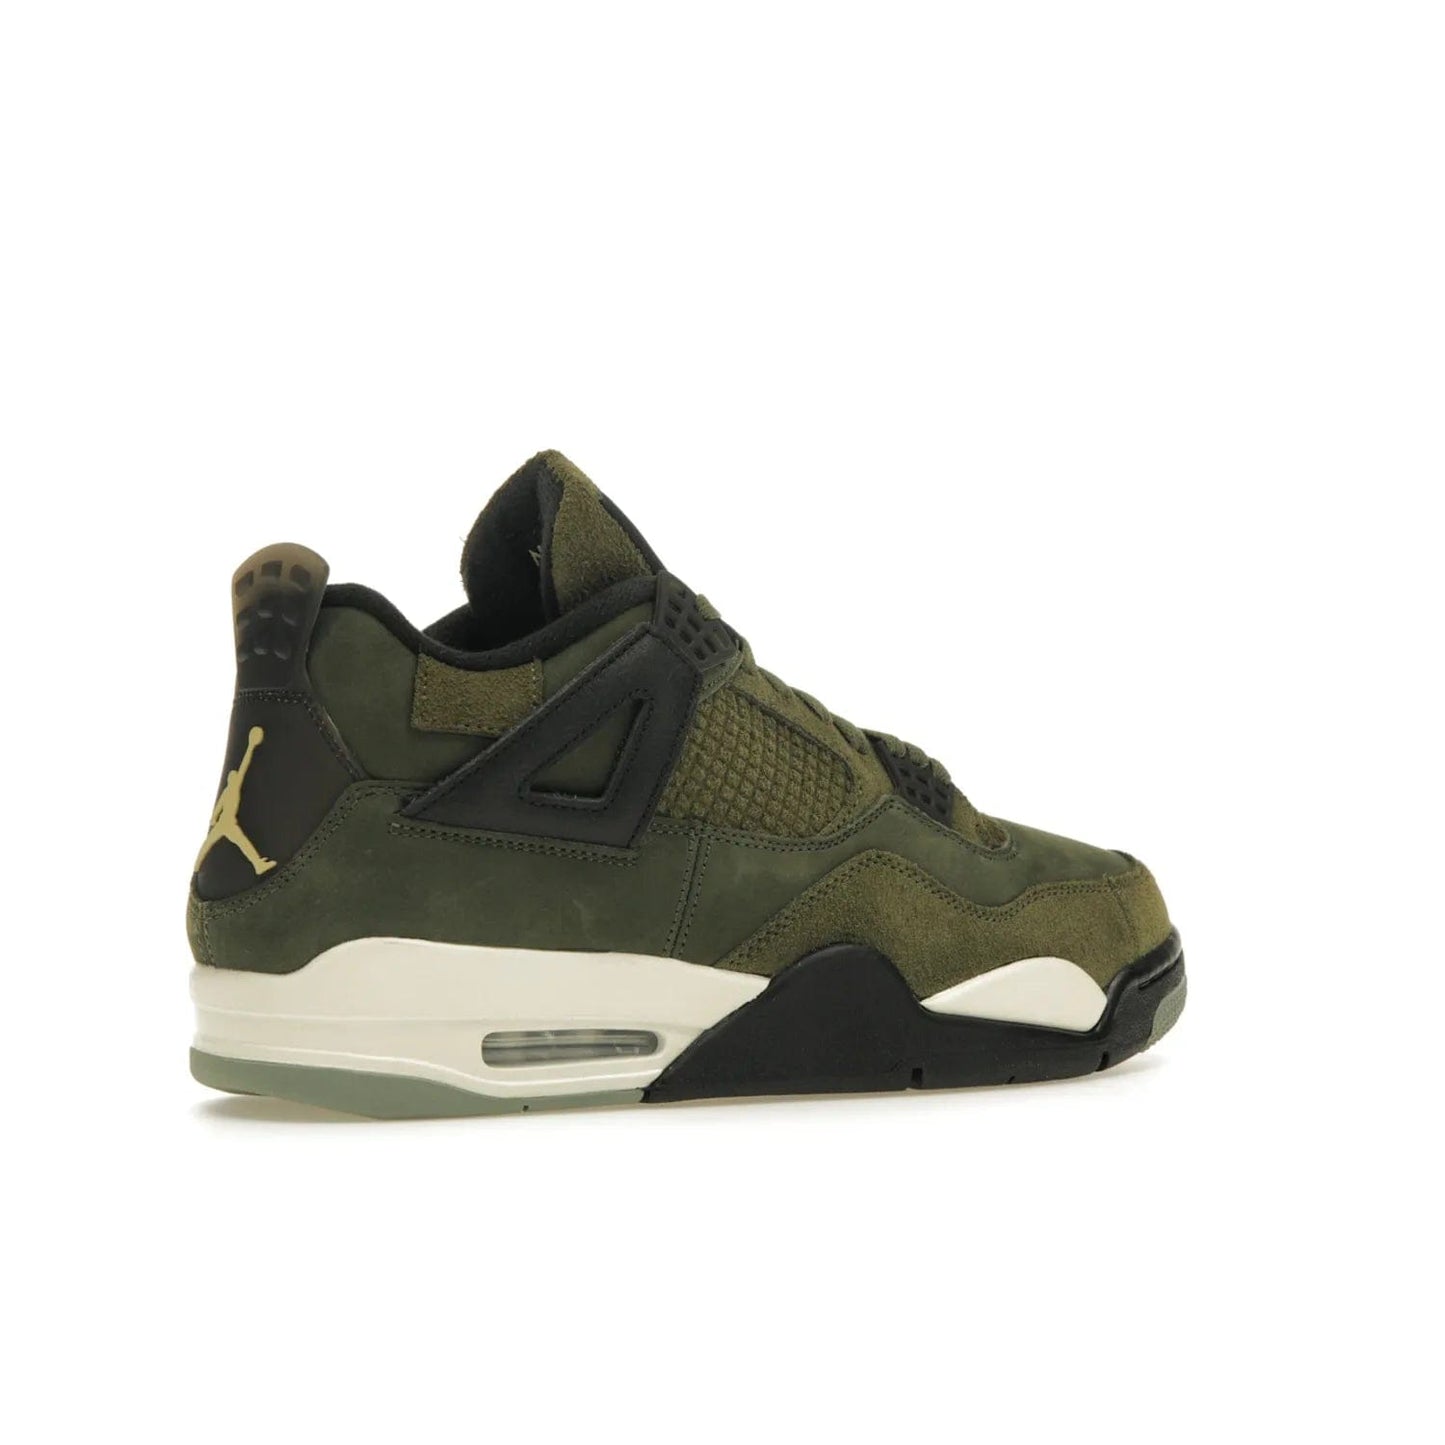 Jordan 4 Retro SE Craft Medium Olive - Image 34 - Only at www.BallersClubKickz.com - Grab the Jordan 4 Retro SE Crafts for a unique style. Combines Medium Olive, Pale Vanilla, Khaki, Black and Sail, with same classic shape, cushioning, and rubber outsole. Available on November 18th!